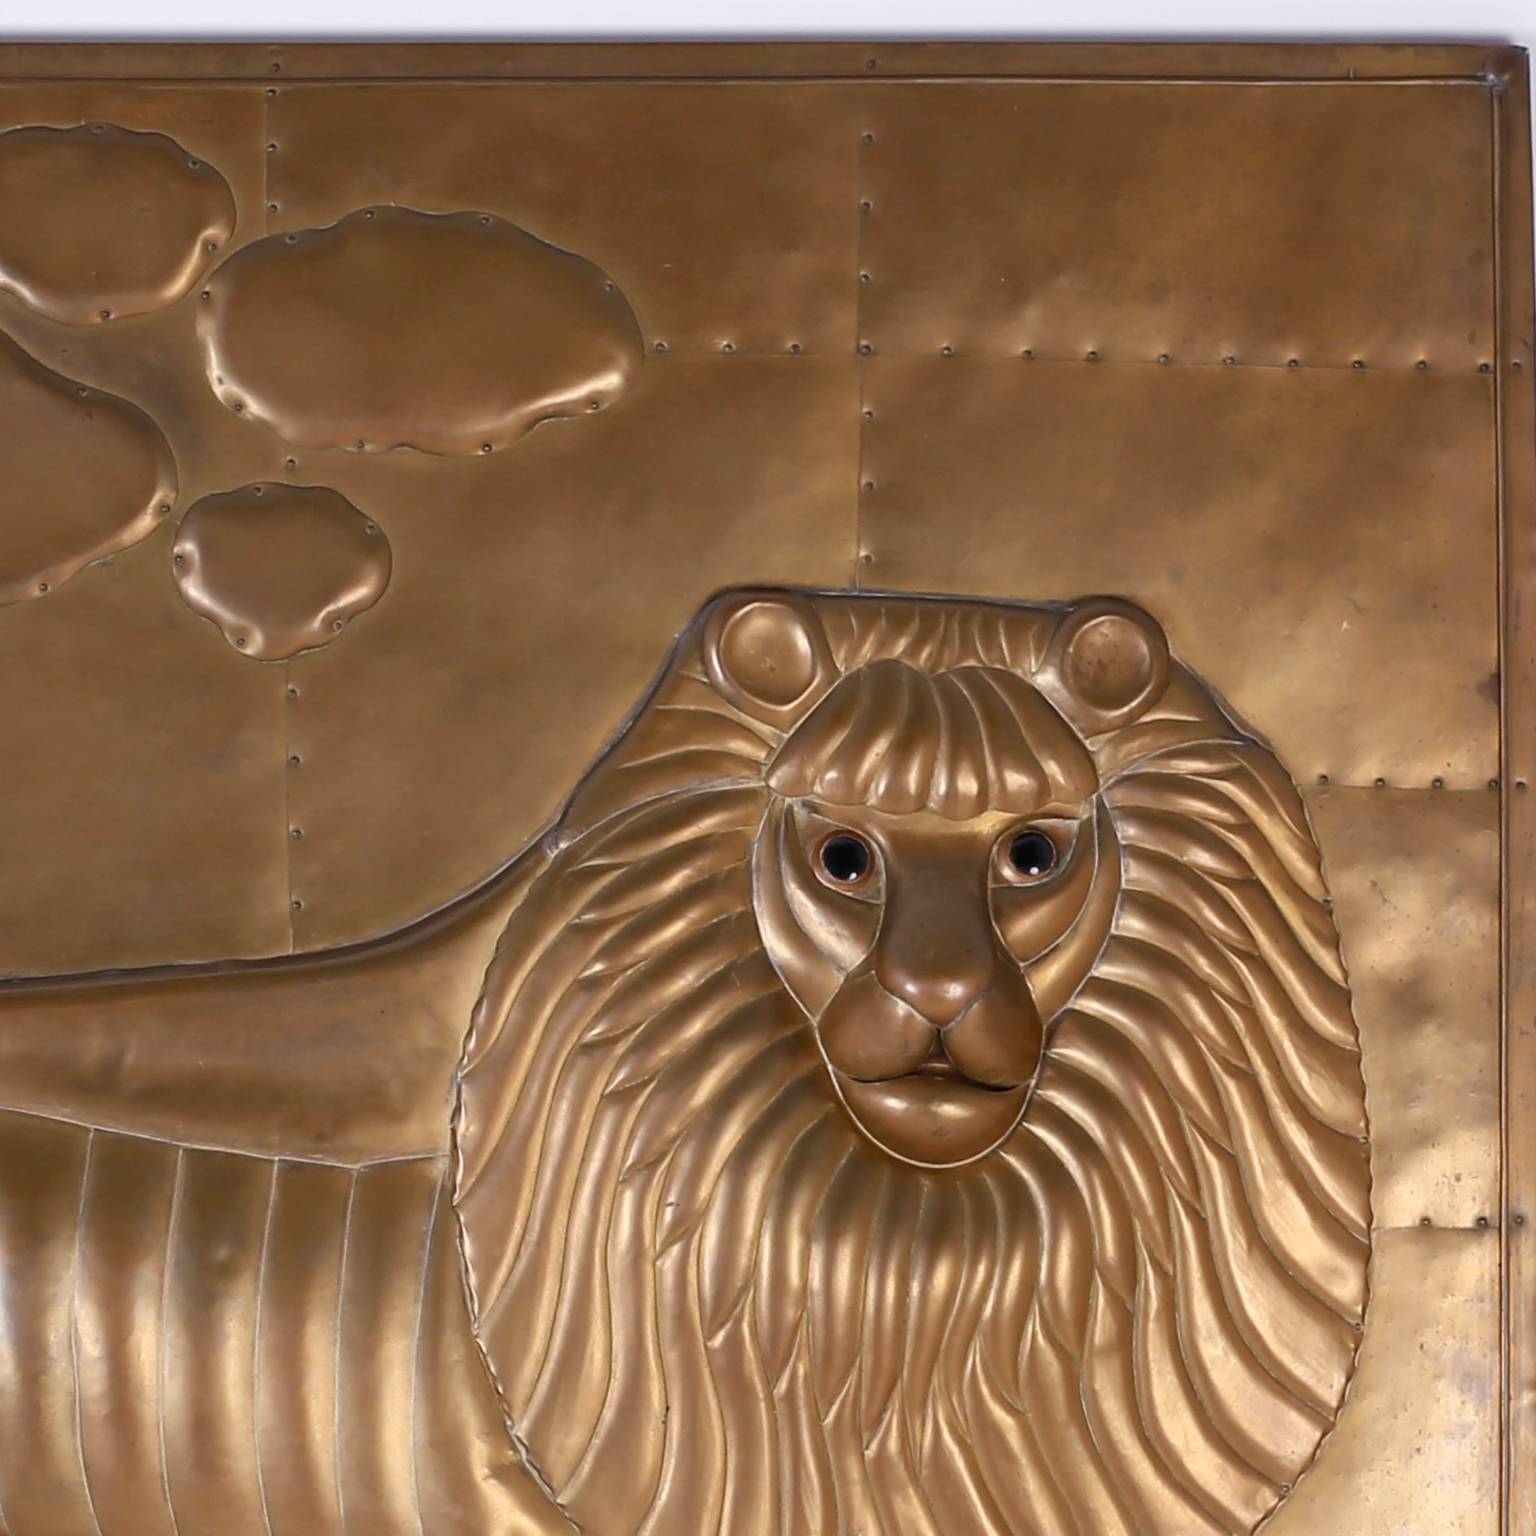 No doubt who is the king of the jungle. Here is a brass sculpture in the form of a plaque that is certainly a dramatic piece of wall art. Signed Sergio Bustamante 14, complete with its own built in Industrial style frame.